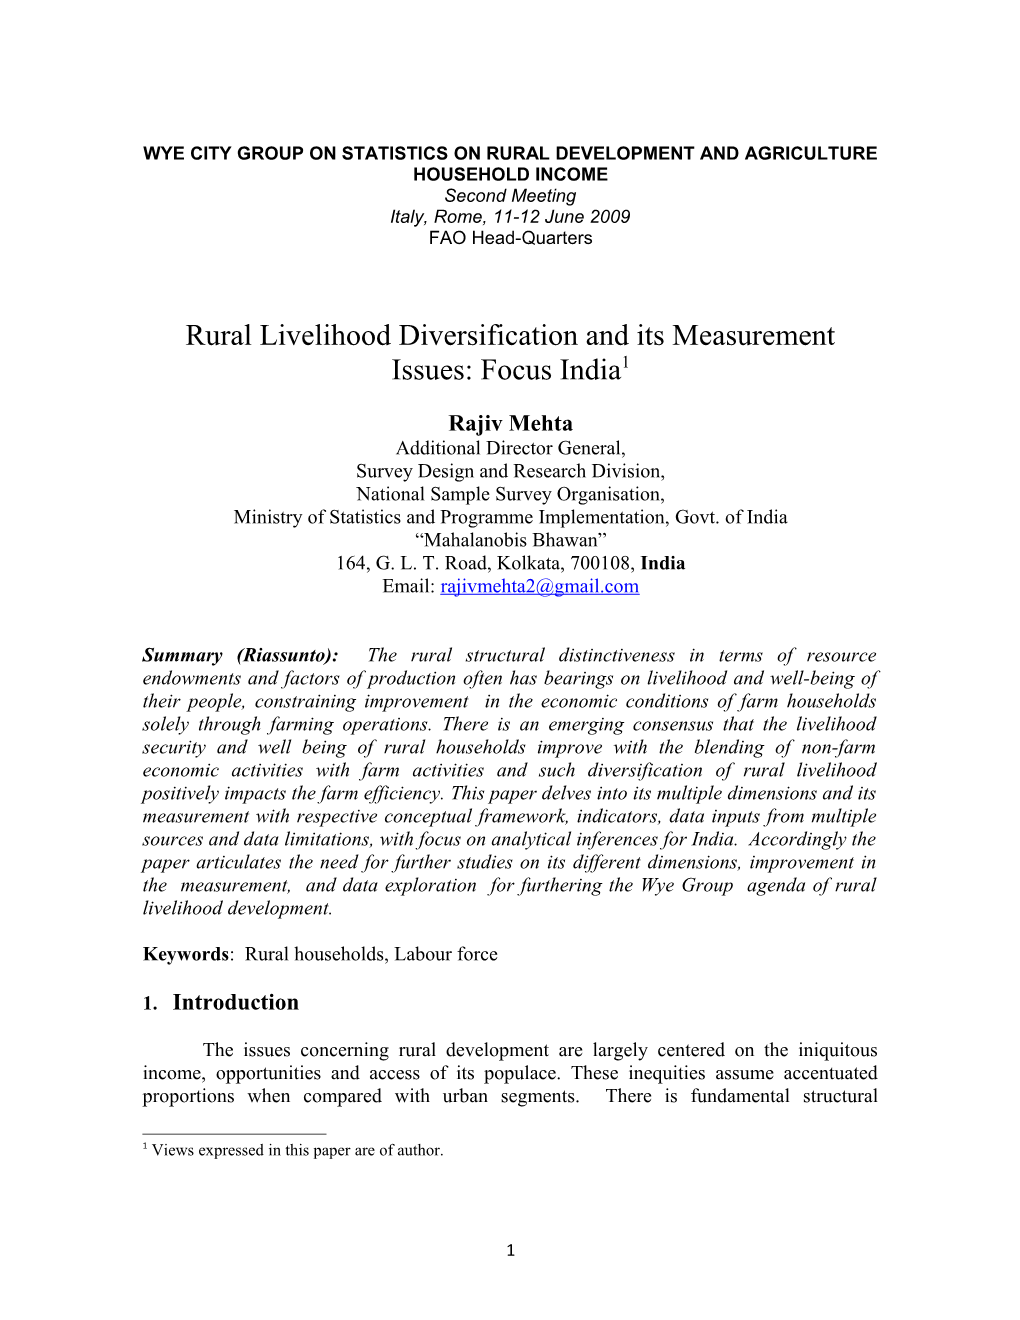 Rural Livelihood Diversification and Its Measurement Issues: Focus India